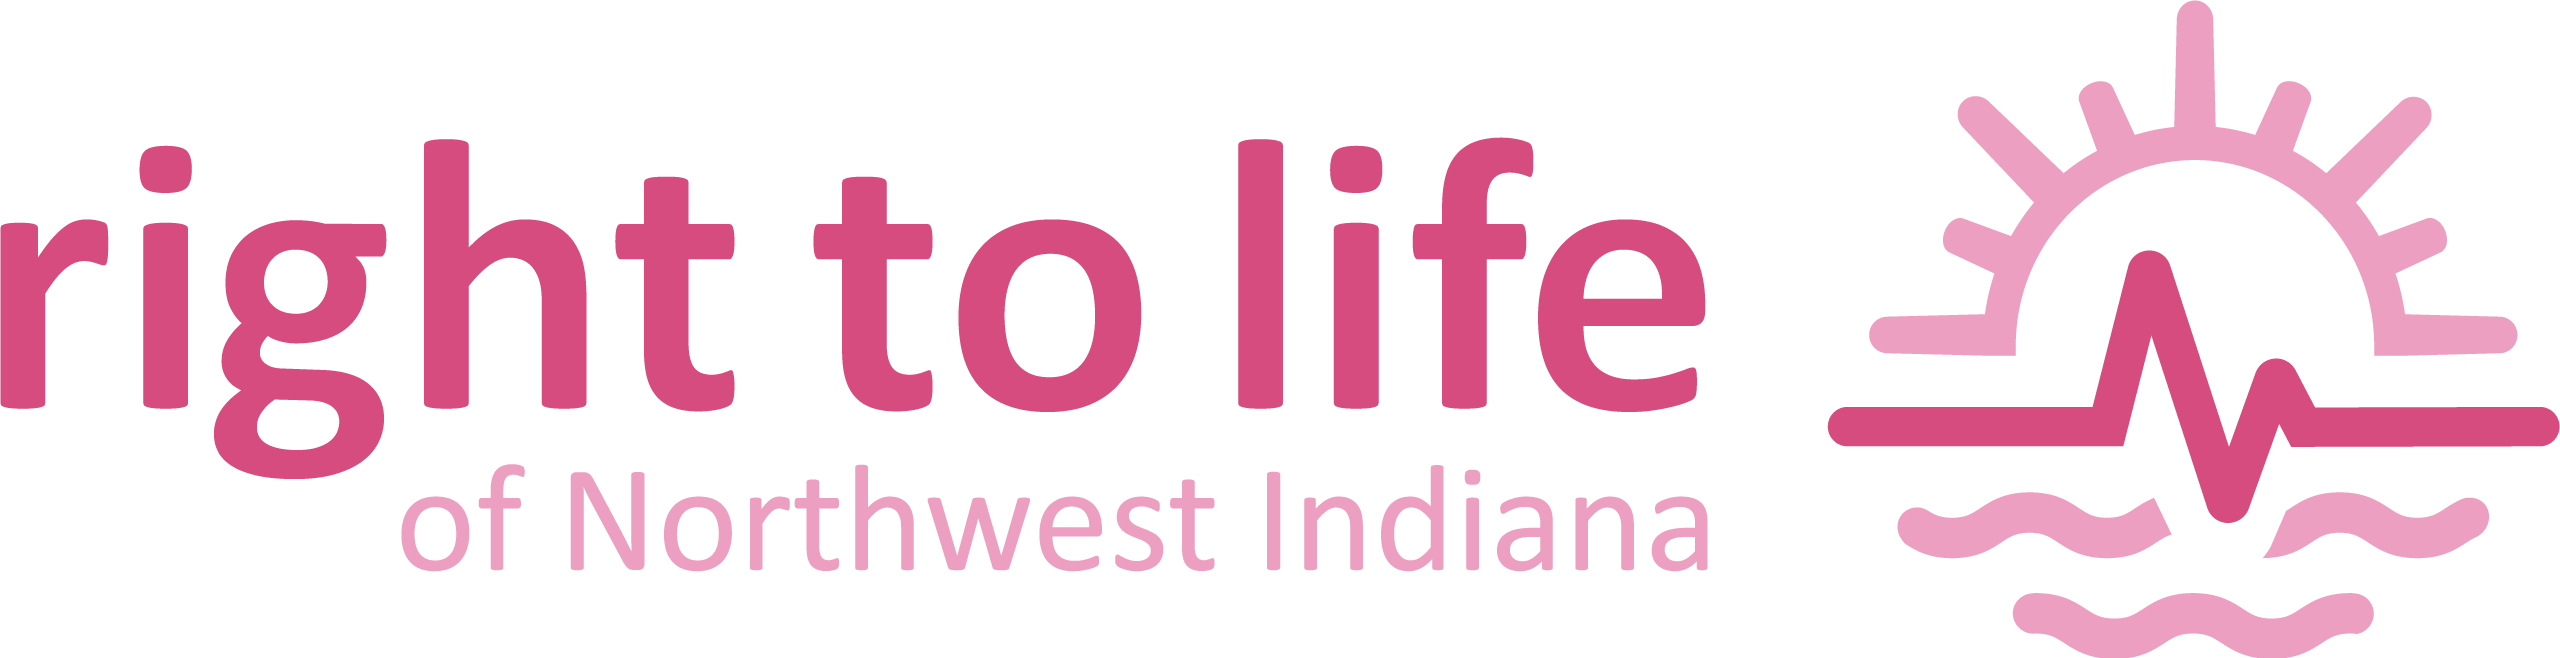 right to life of northwest indiana